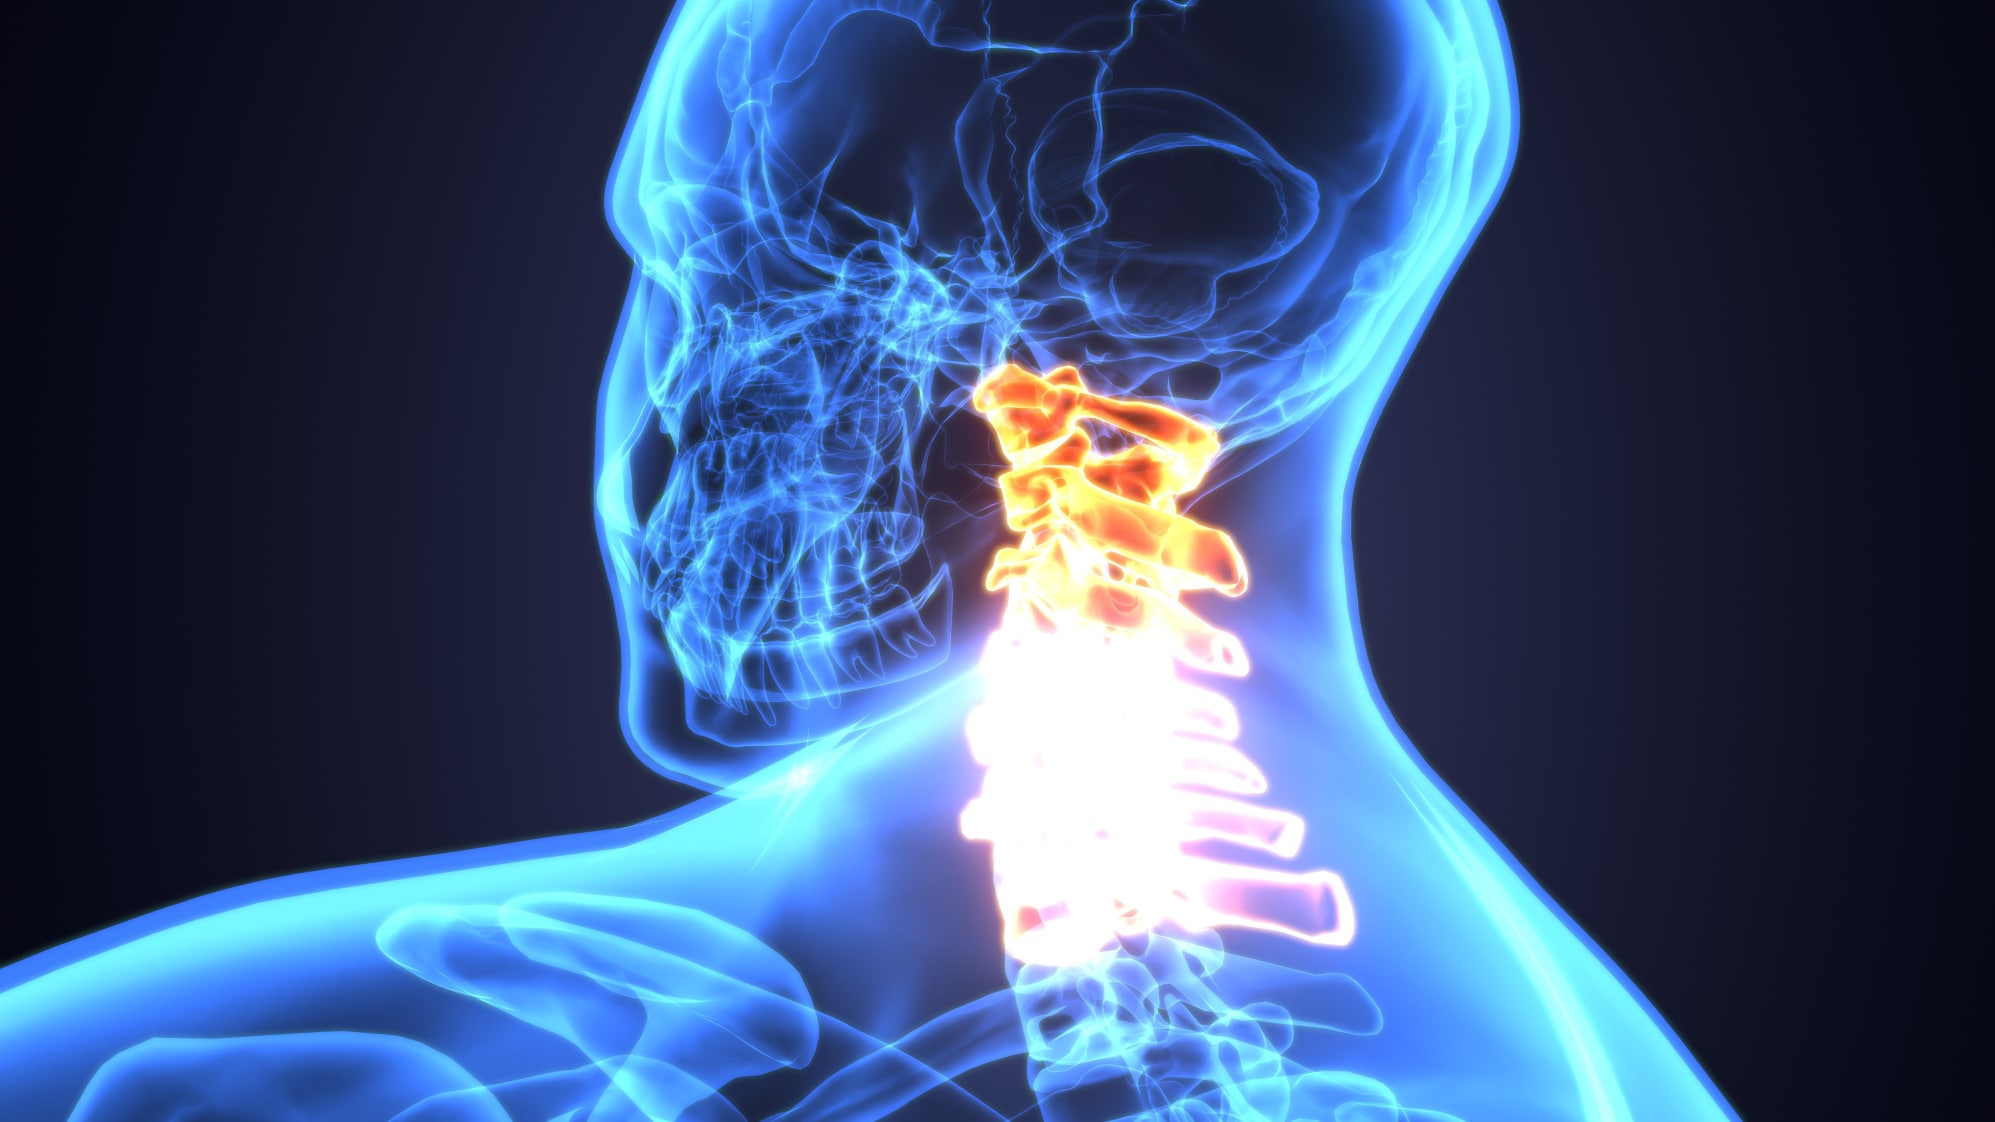 Life Post Major Motor Vehicle Accident: What Type of Rehabilitation Will I Need Following a Spinal Cord Injury?